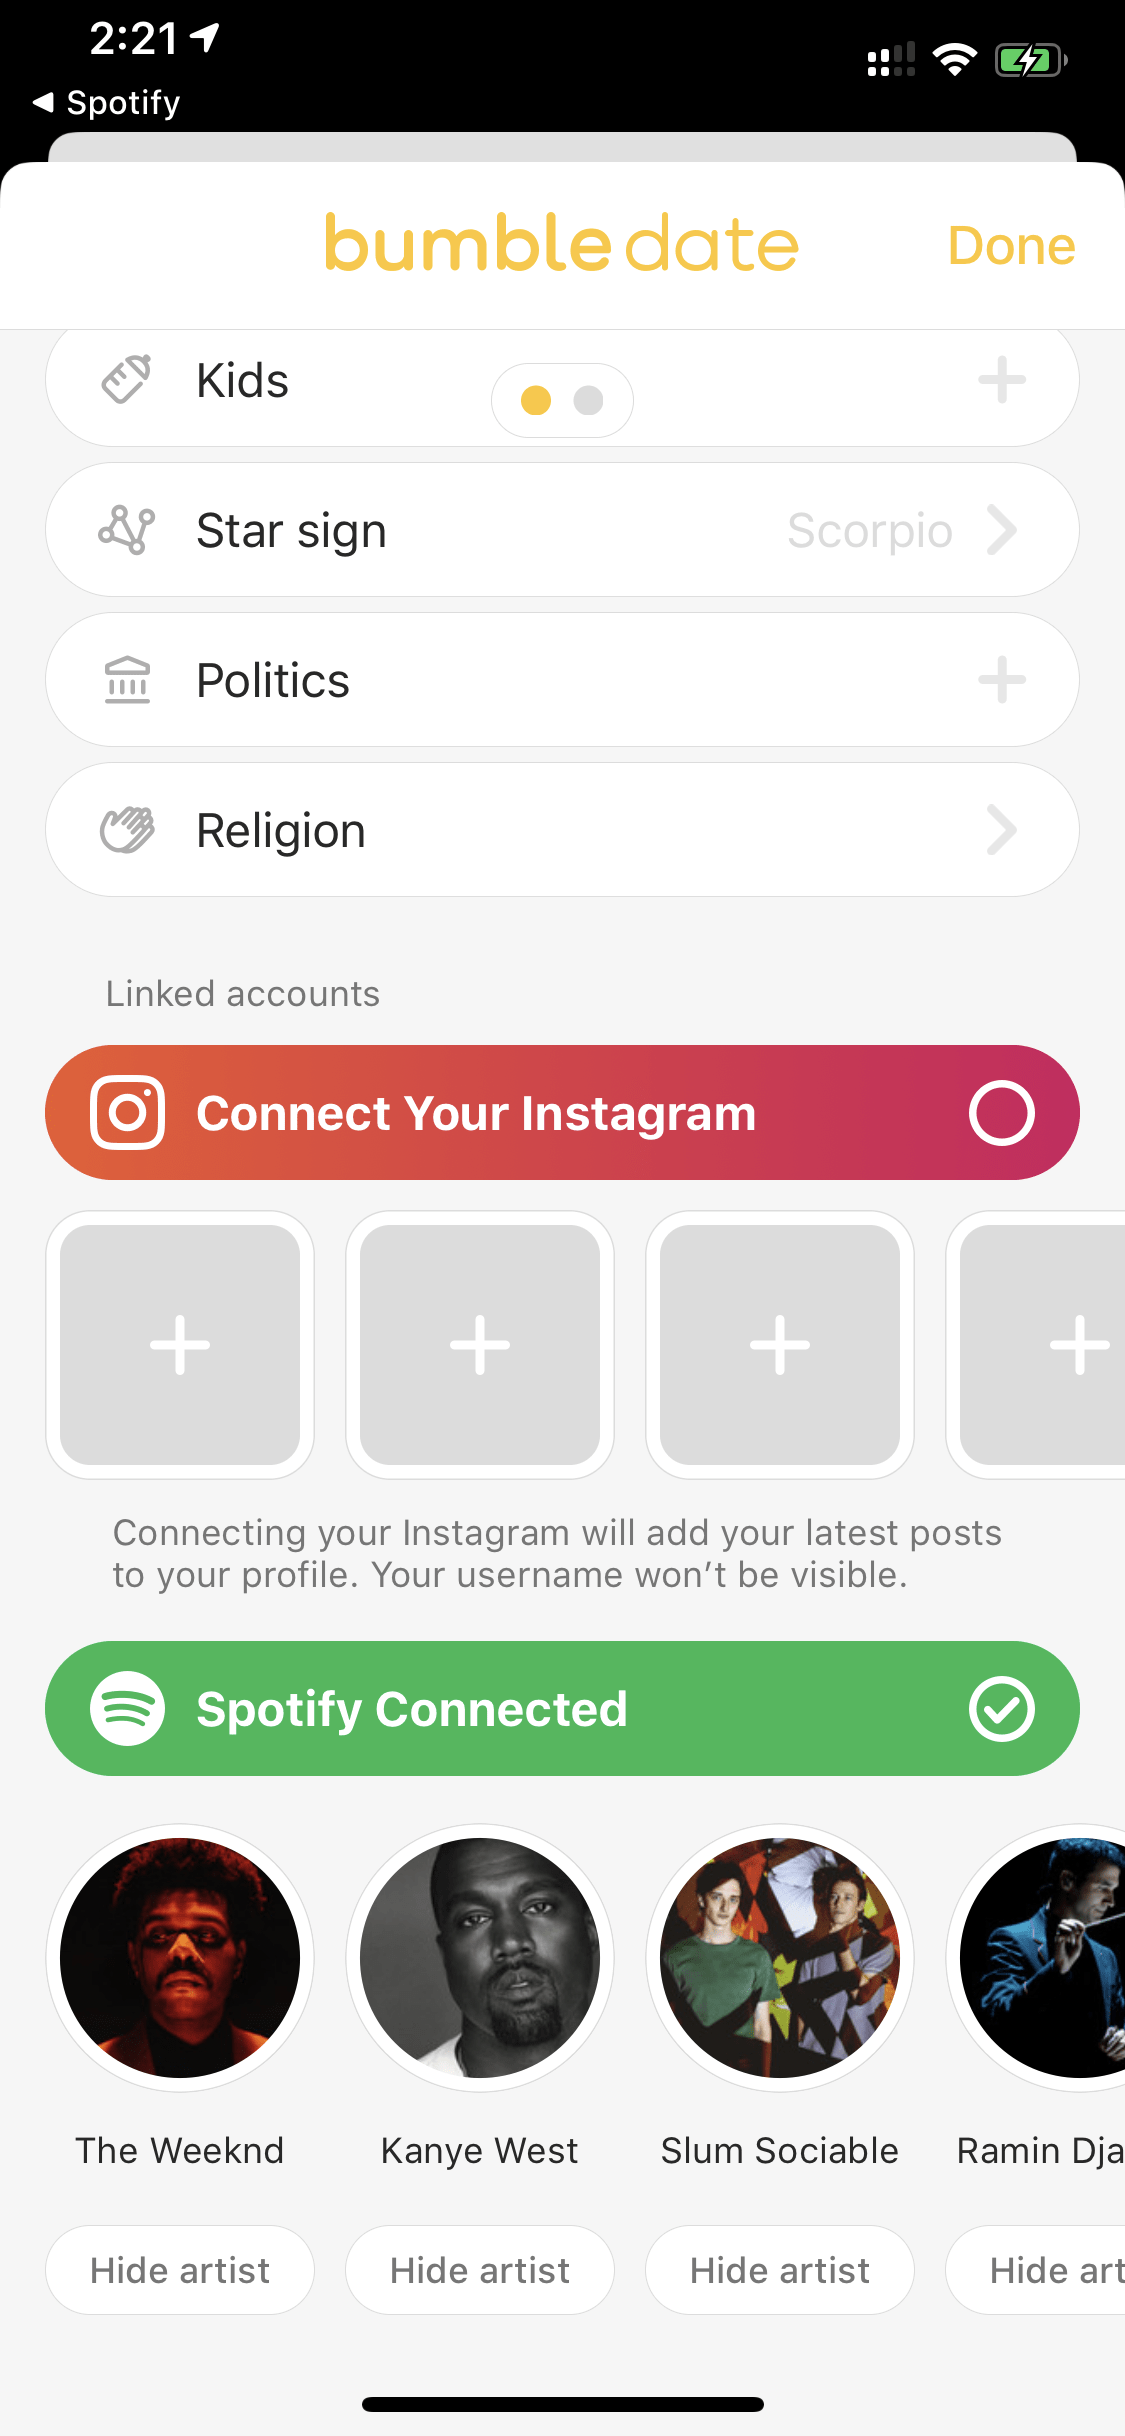 can't connect spotify to bumble account